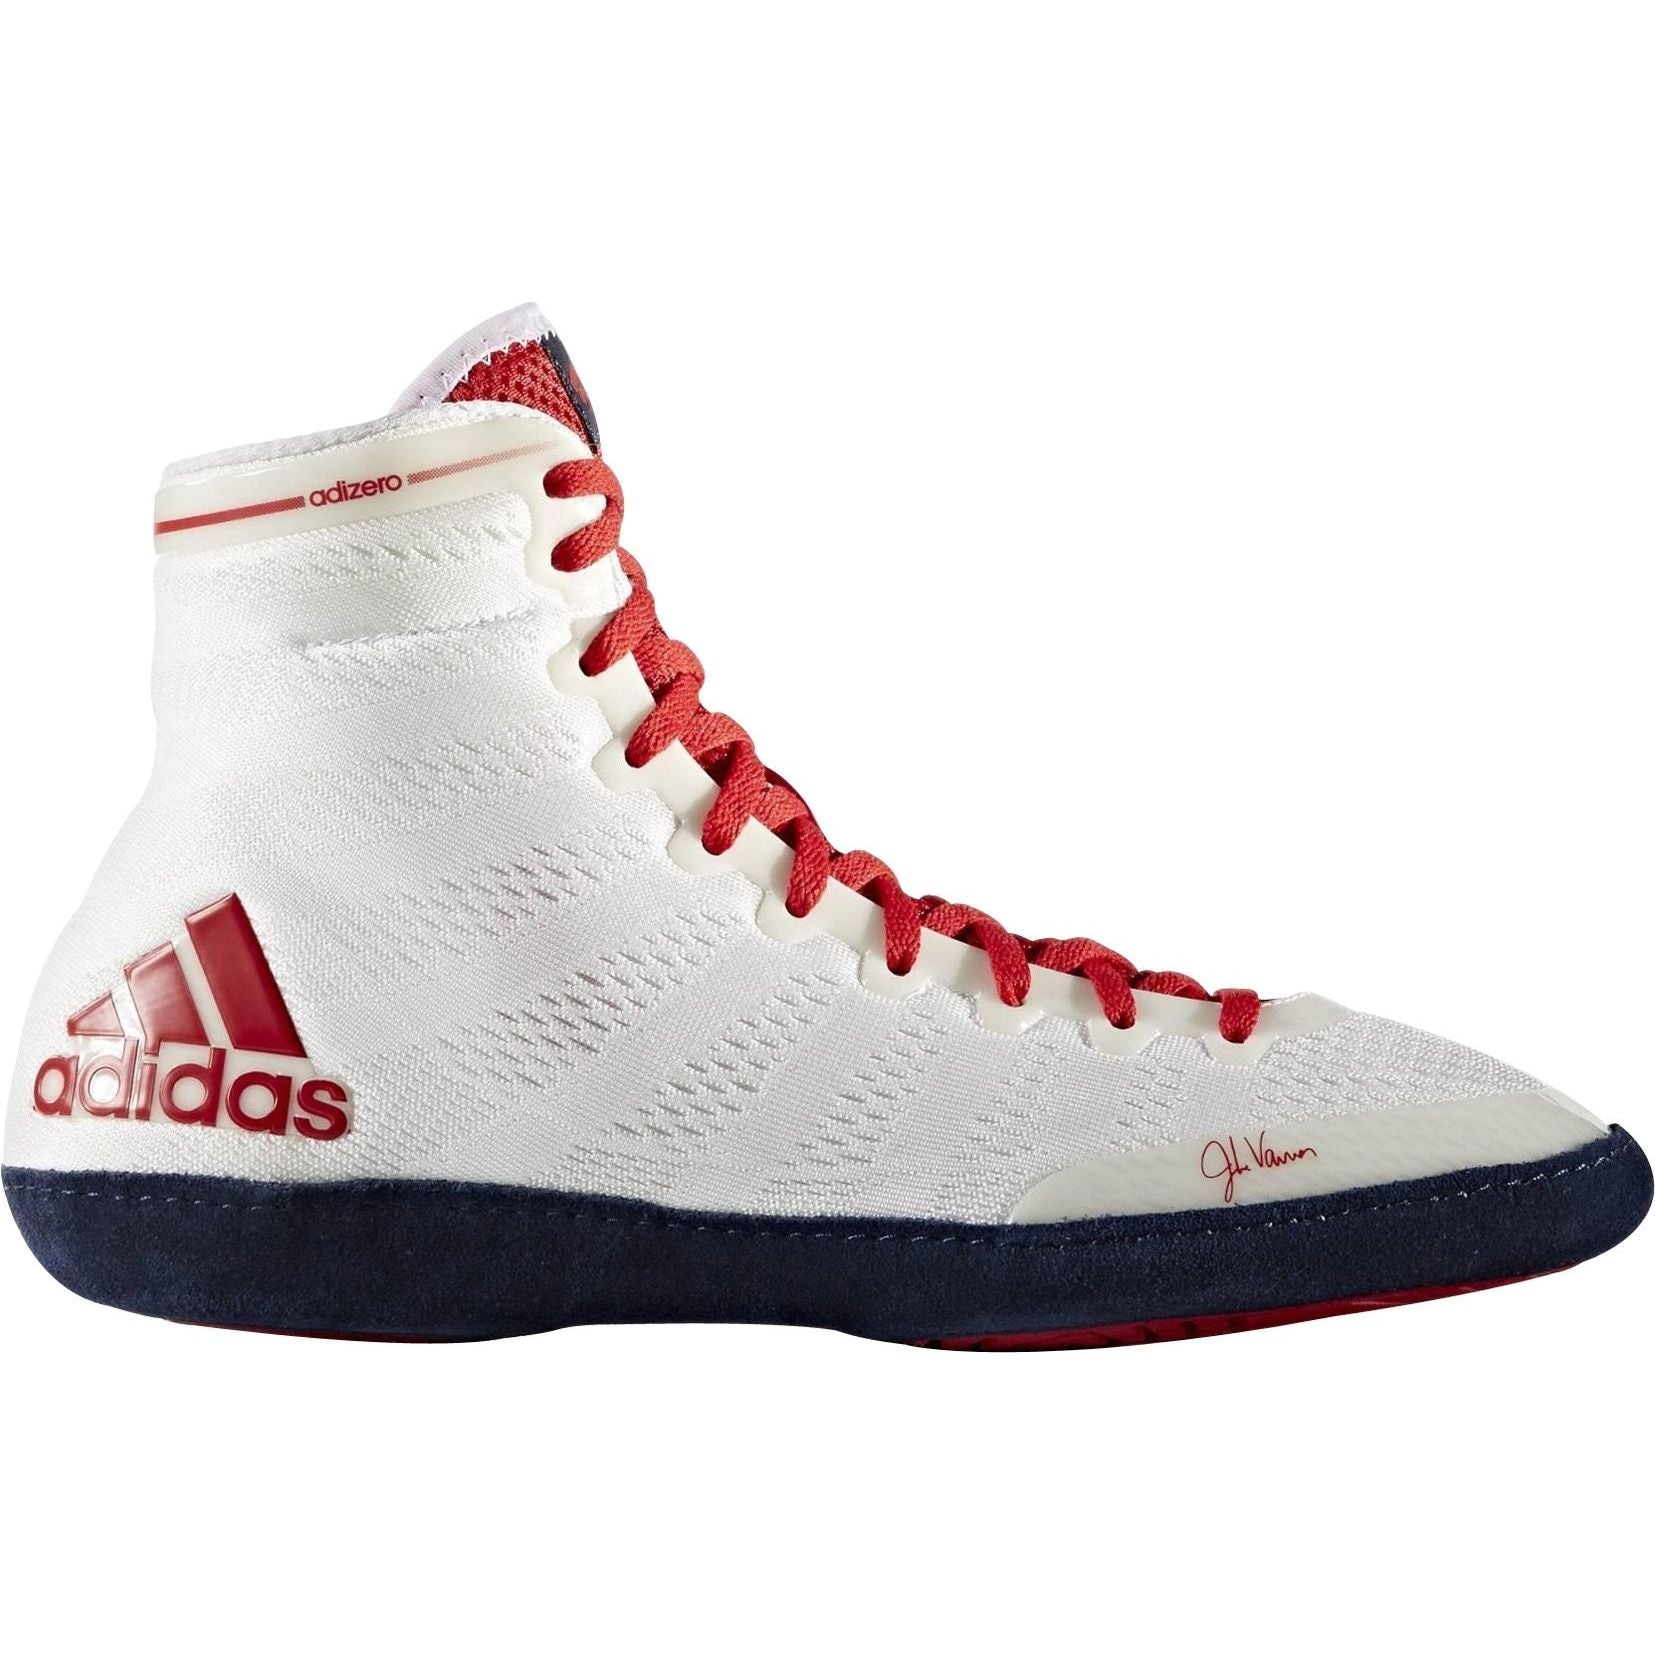 Boxing & Wrestling Shoes & Apparel | Start Fitness – Page 2